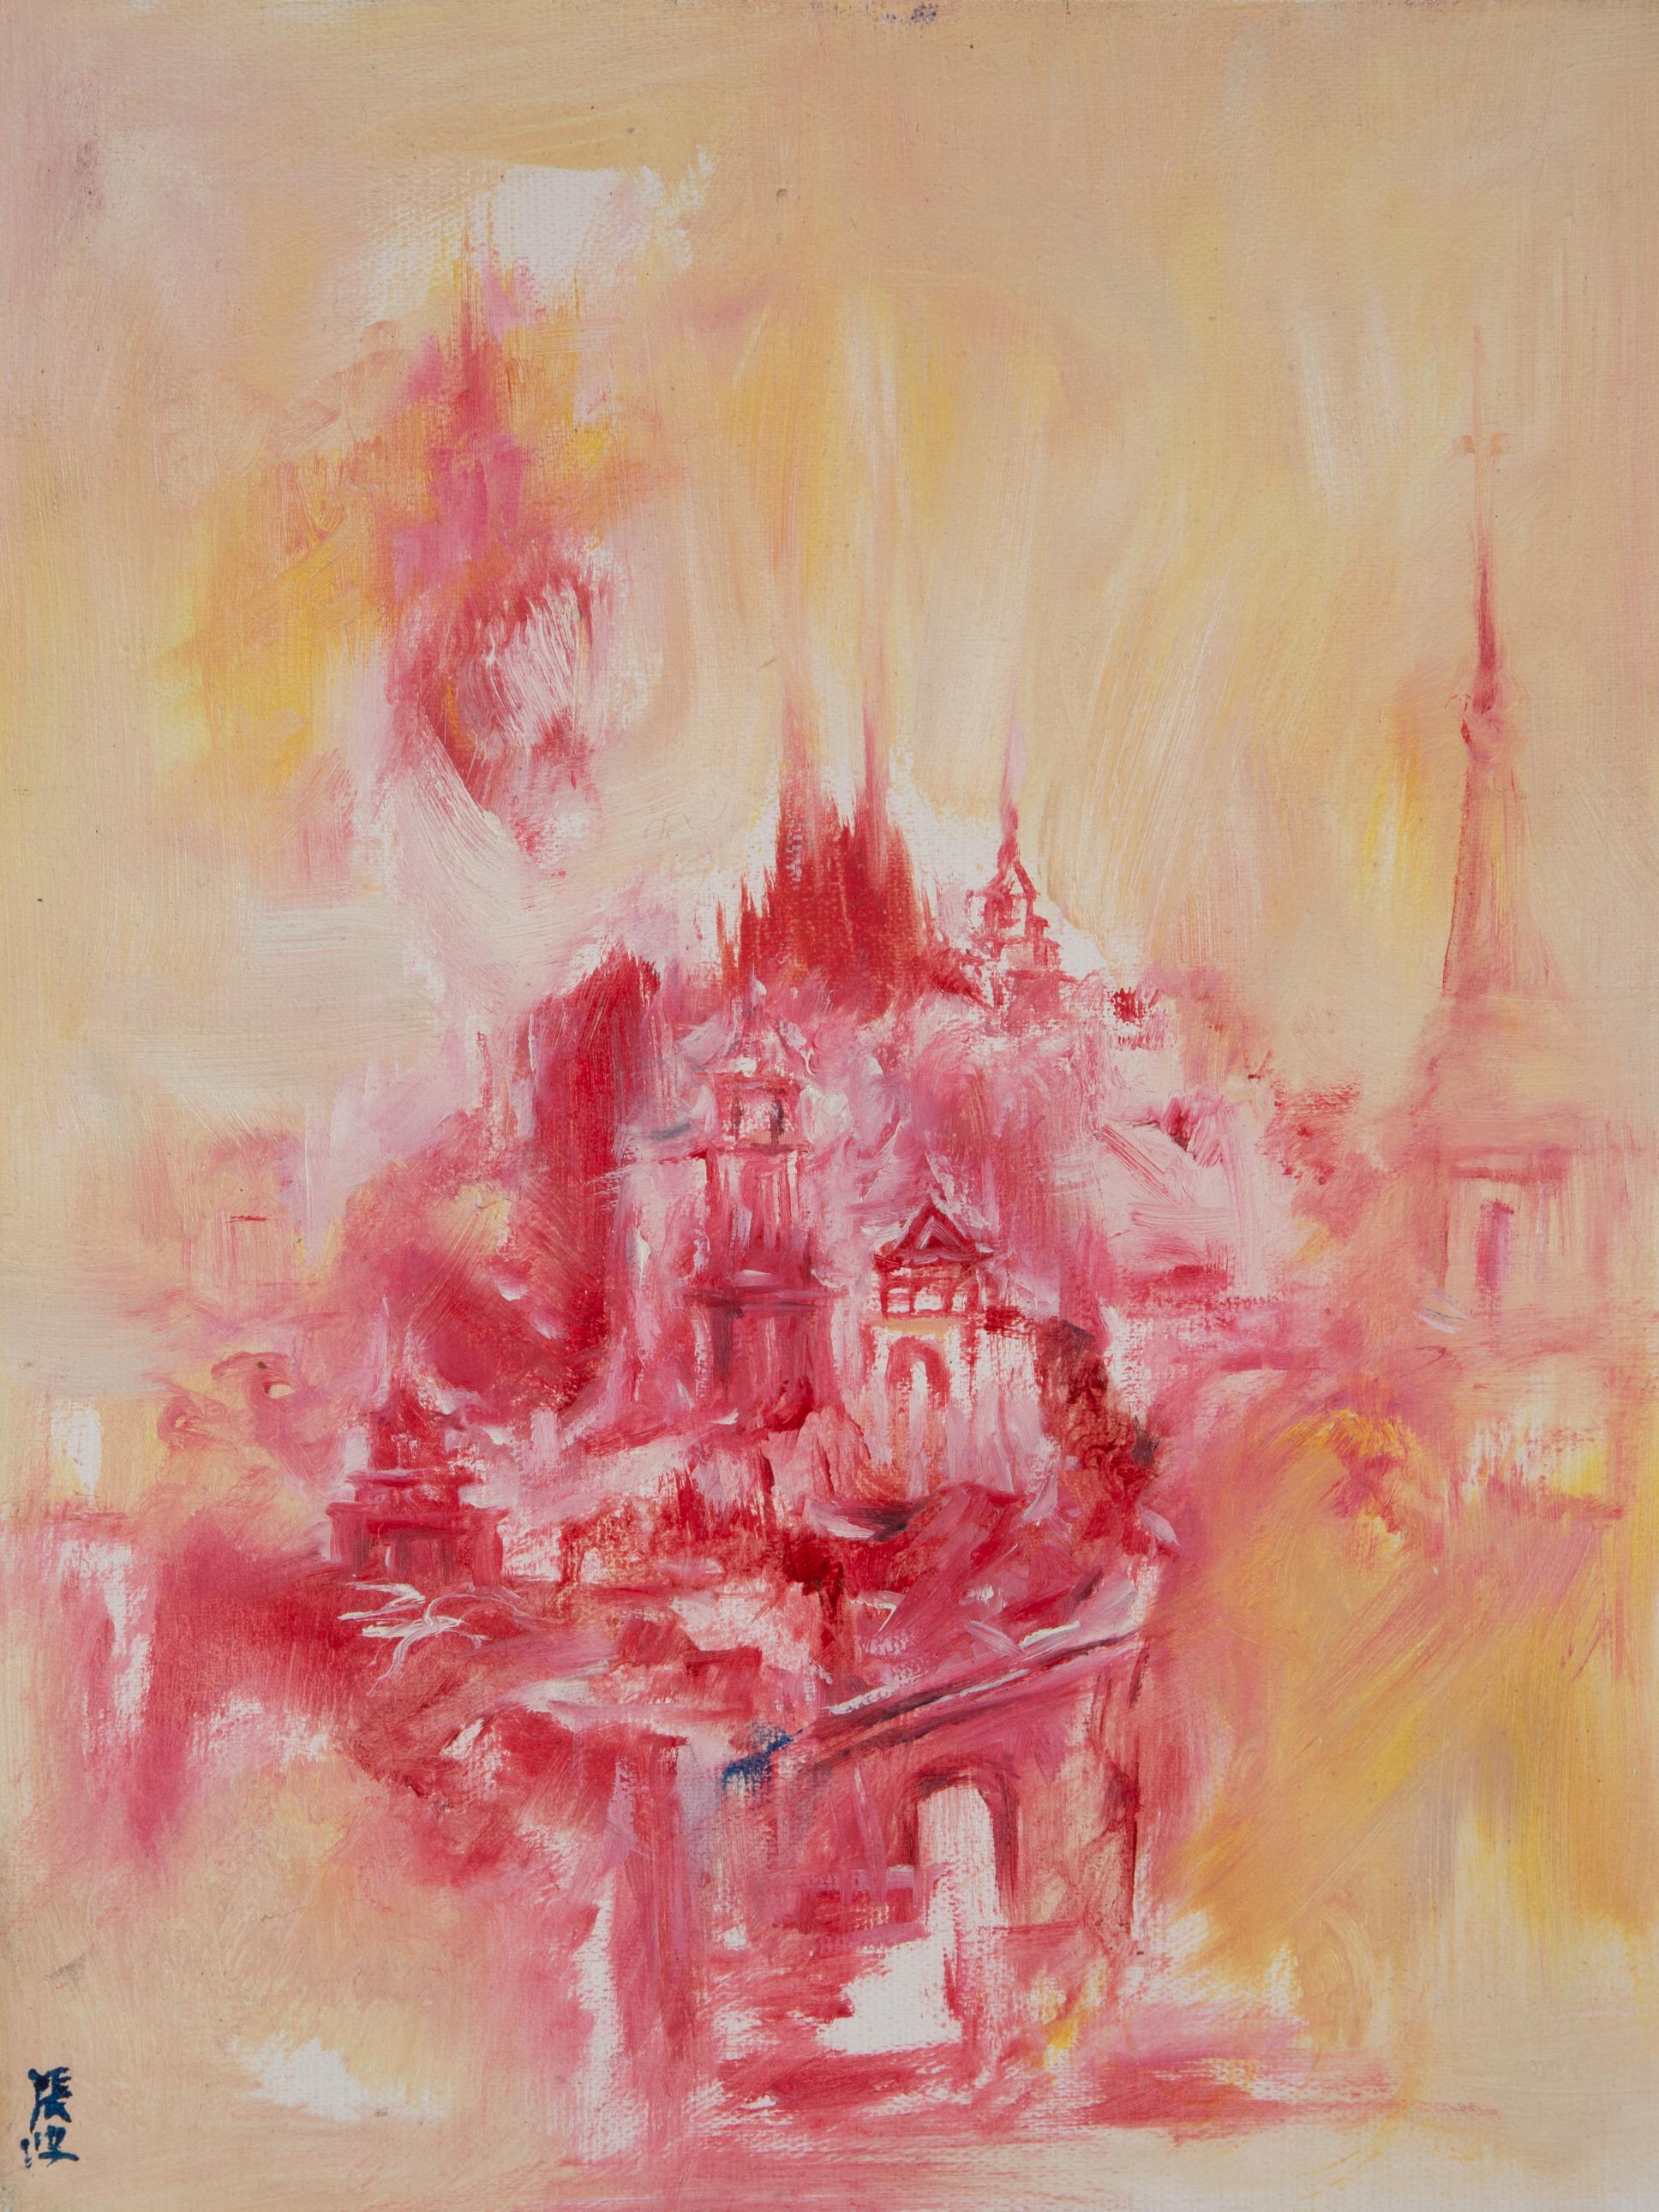 Bo Zhang Abstract Original Oil On Canvas "The Red City In My Imagination"